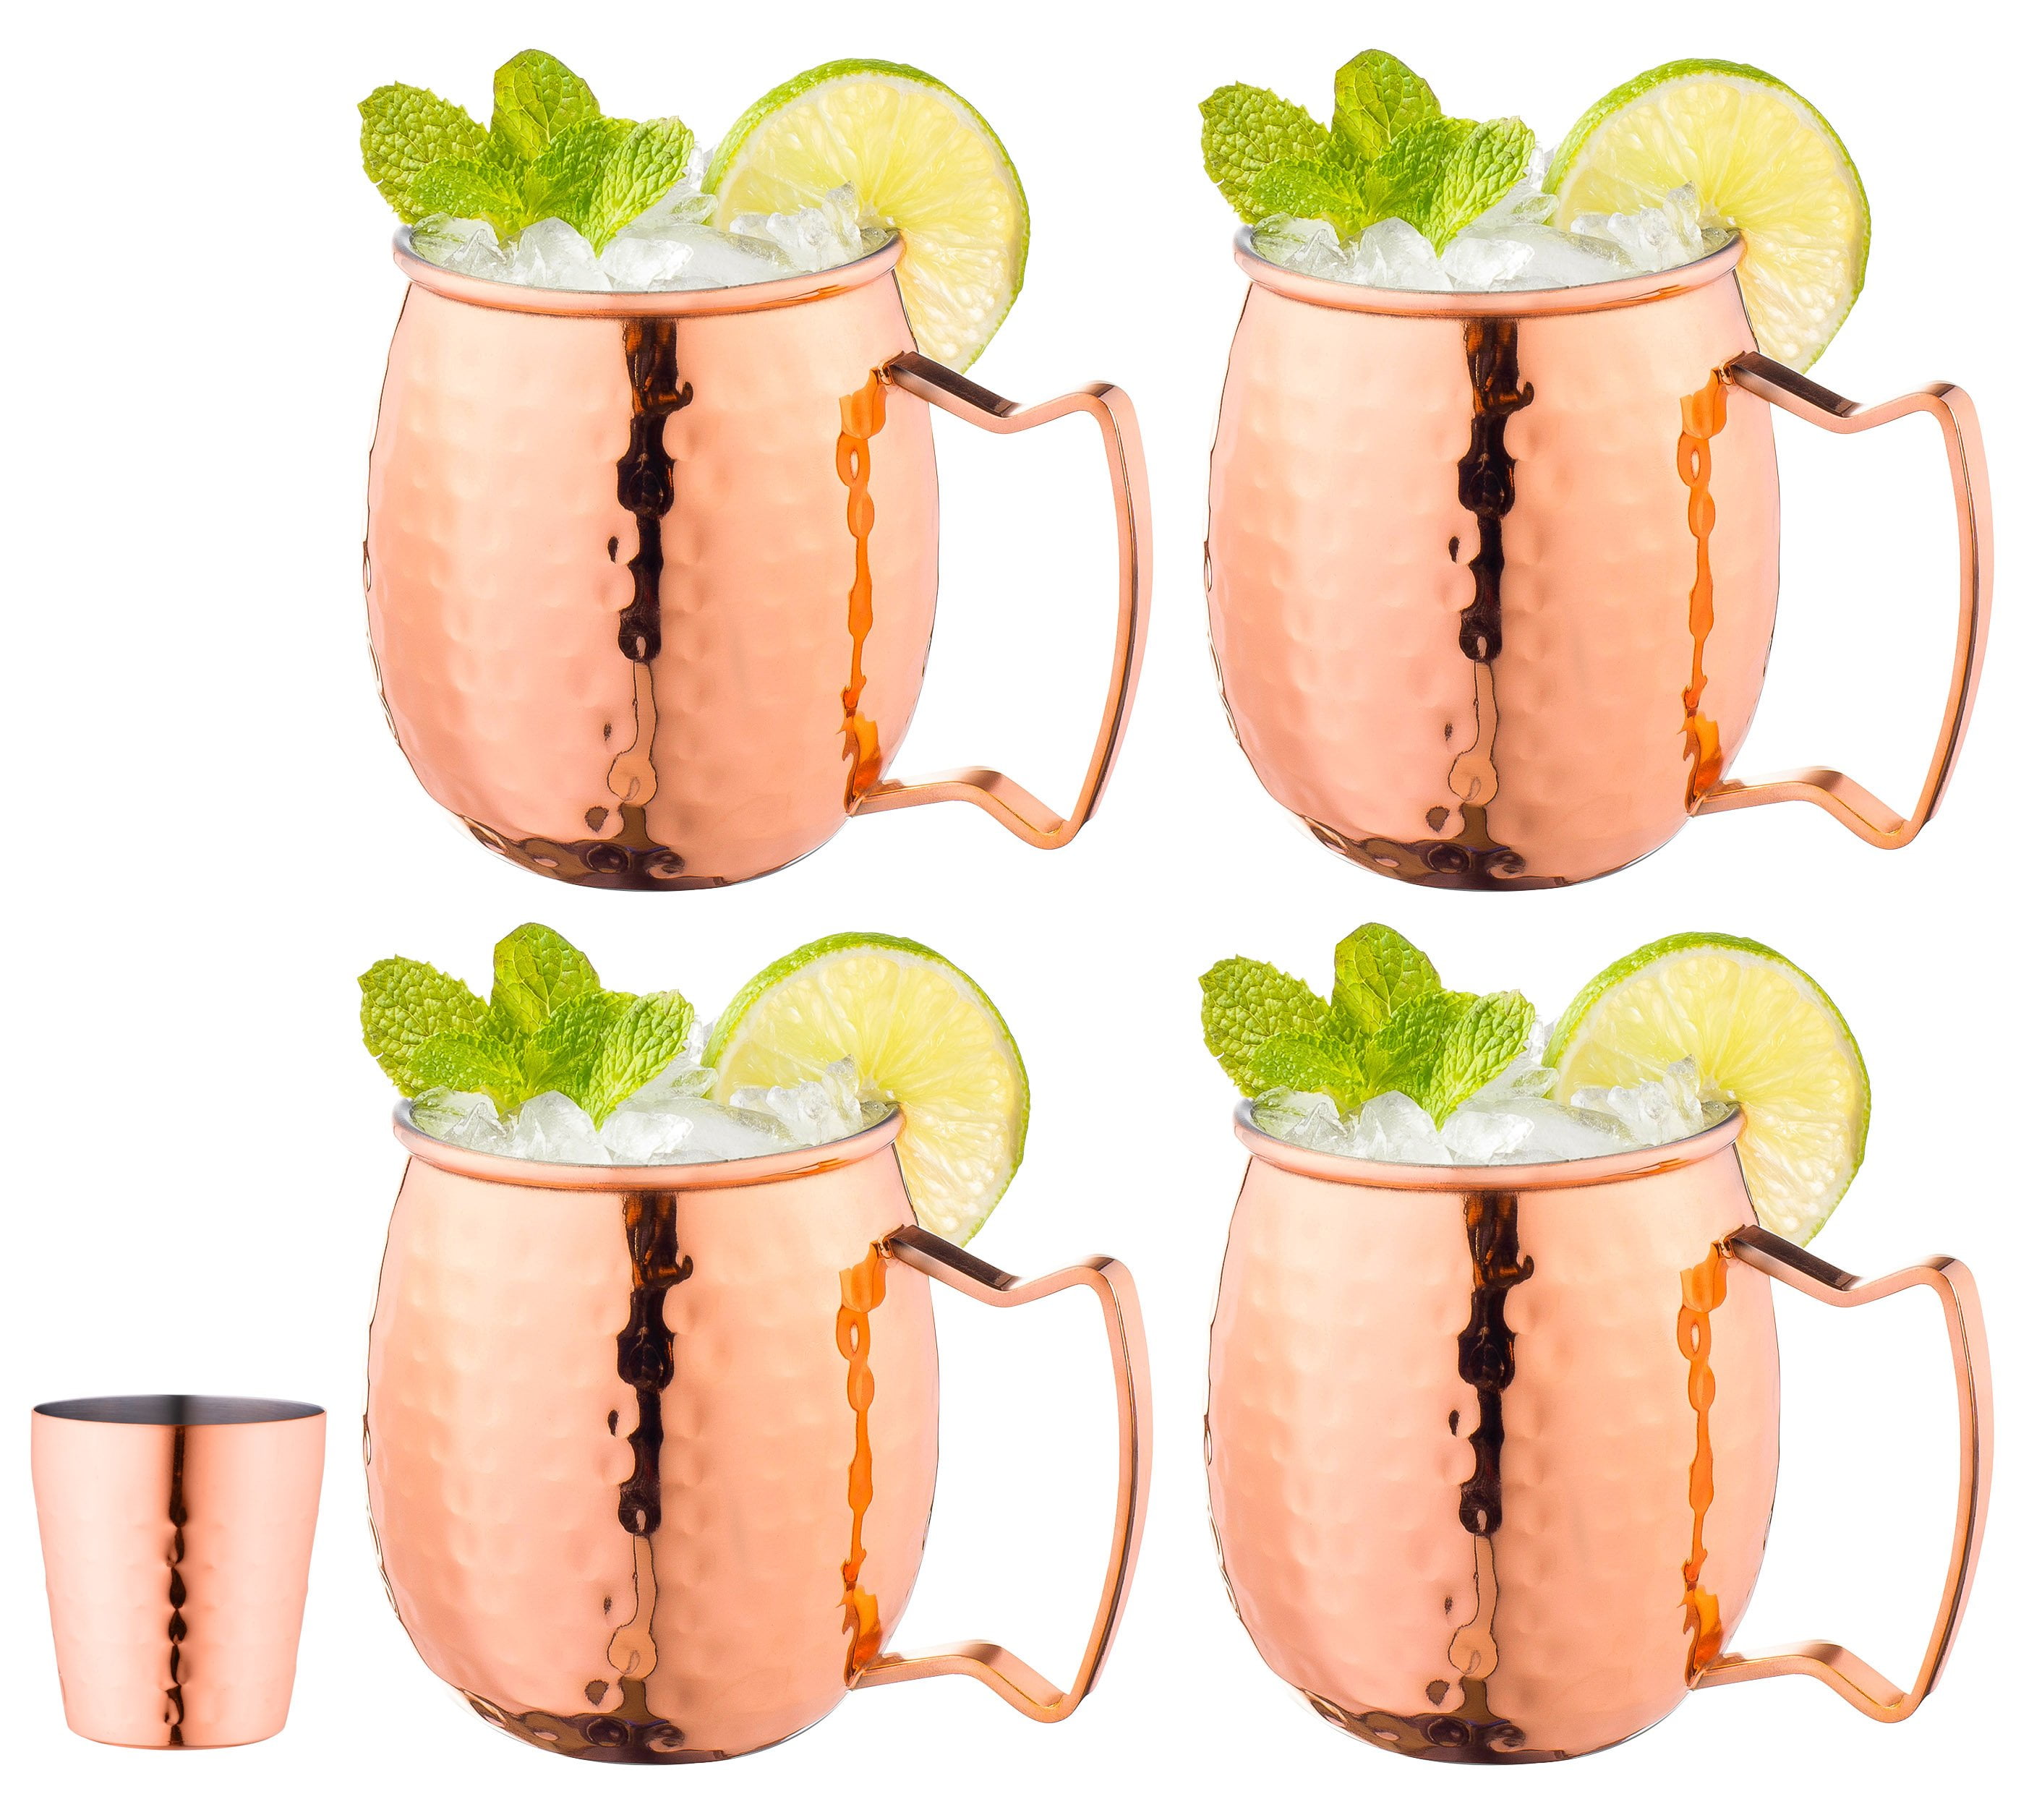 Solid Copper Moscow Mule Mugs Pure Solid Copper No Lining Smooth Finish 16 oz Copper Mug Set of 2 